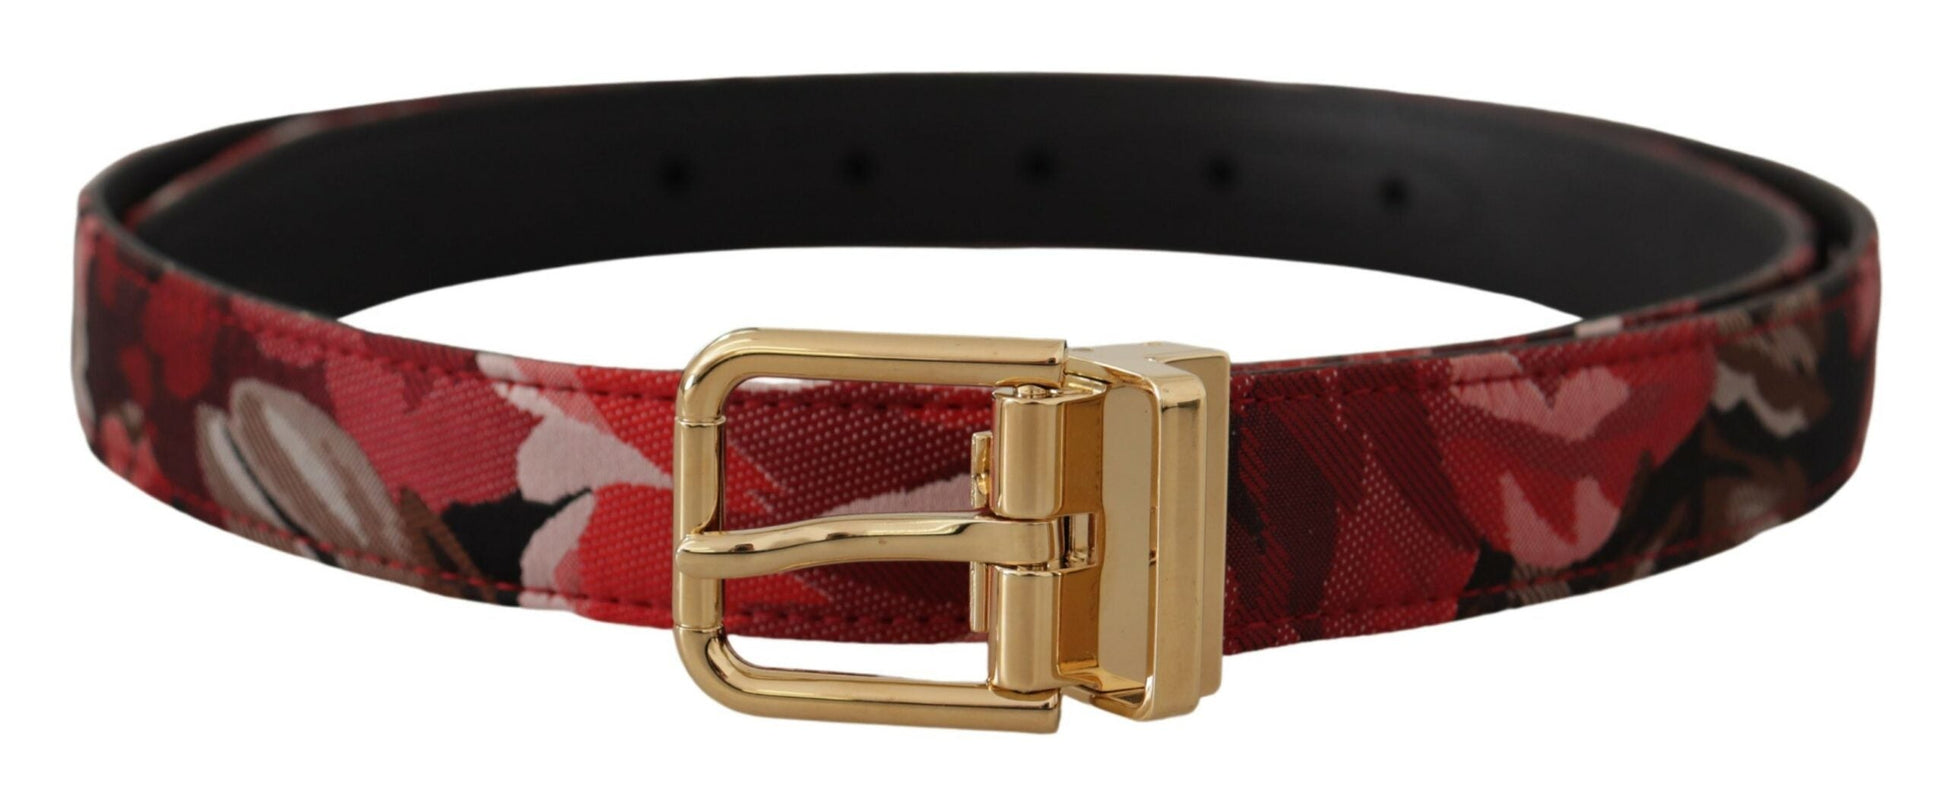 Dolce & Gabbana Red Multicolor Leather Belt with Gold-Tone Buckle | Fashionsarah.com